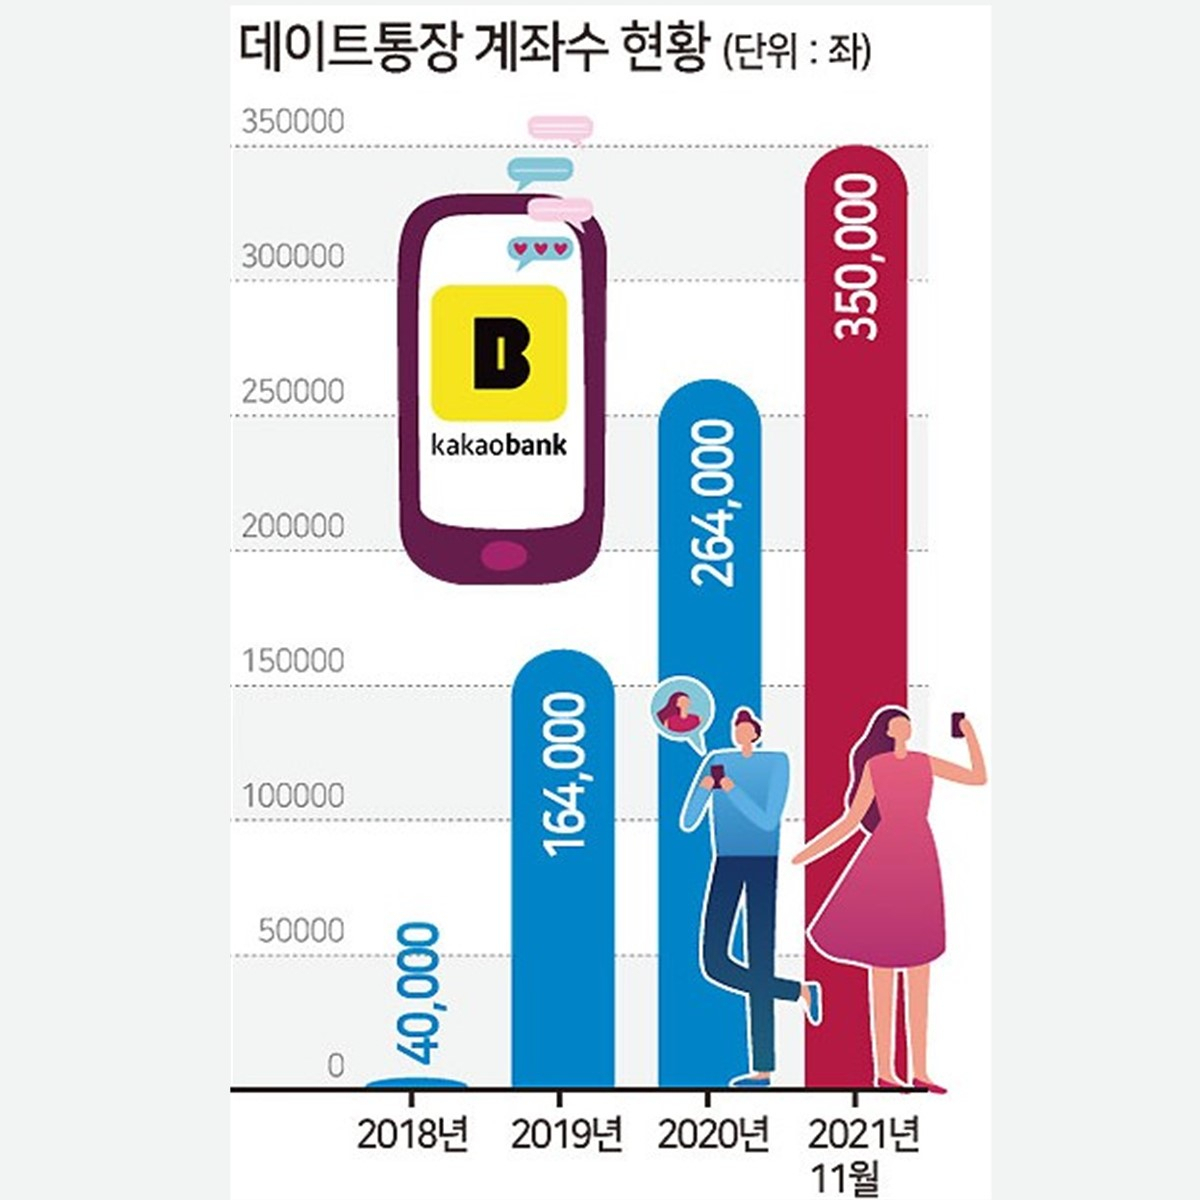 The number of users of KakaoBank’s couple accounts has increased more than eightfold from 40,000 in 2018 to over 350,000 in late 2021, according to the data collected by KakaoBank. (KakaoBank)